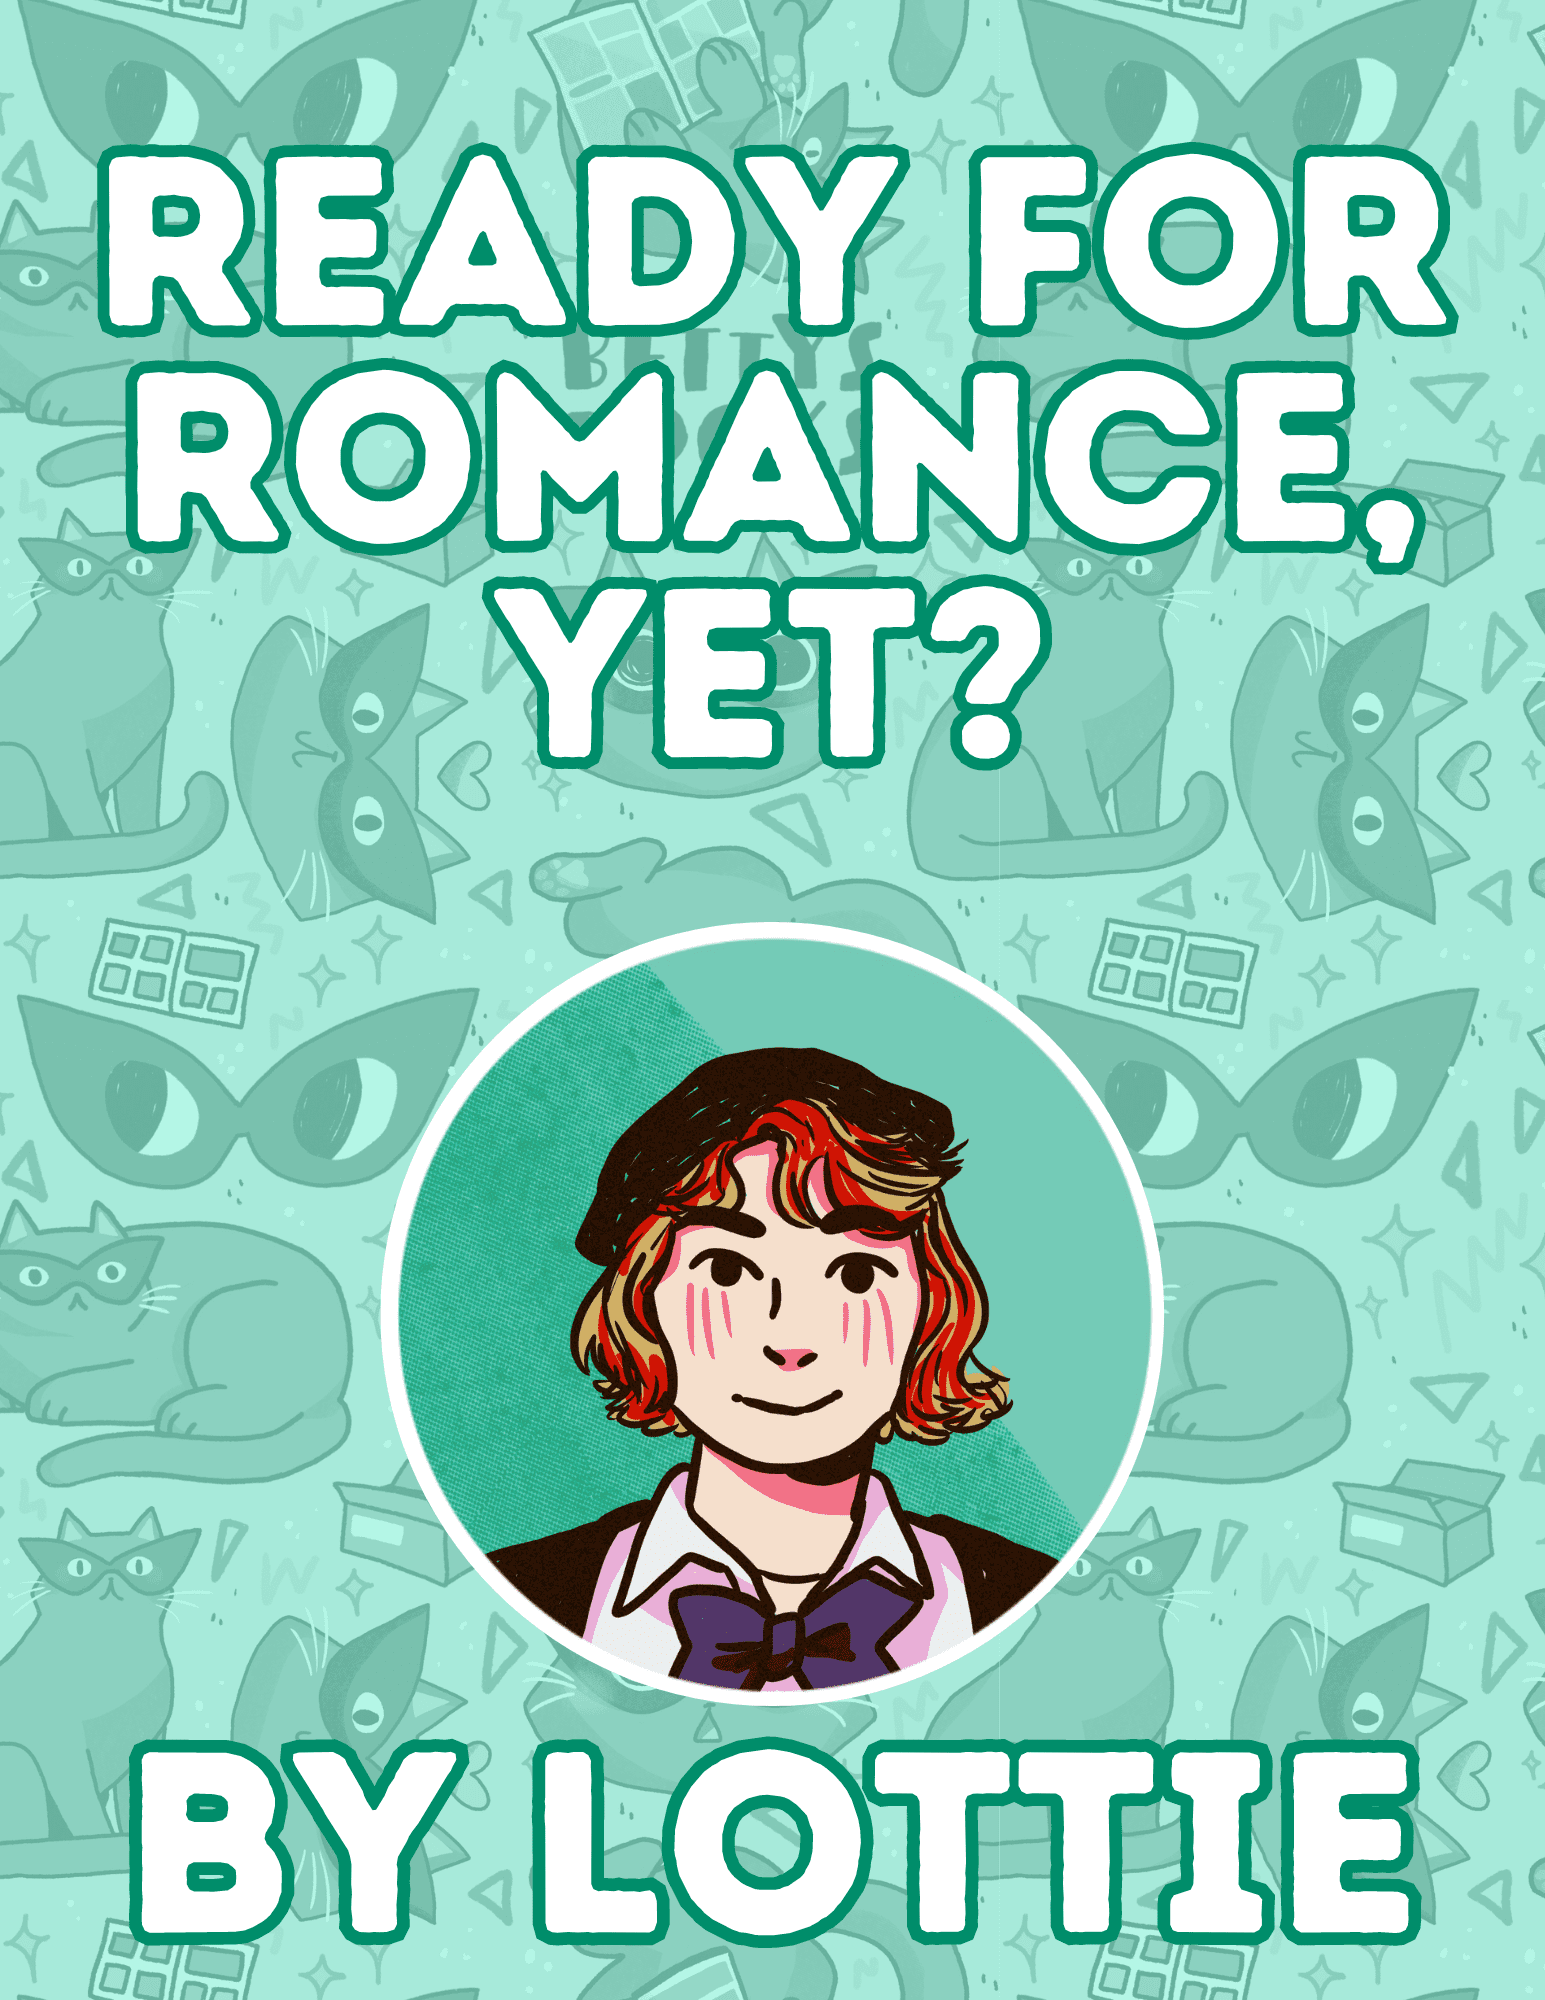 Ready for Romance, Yet?